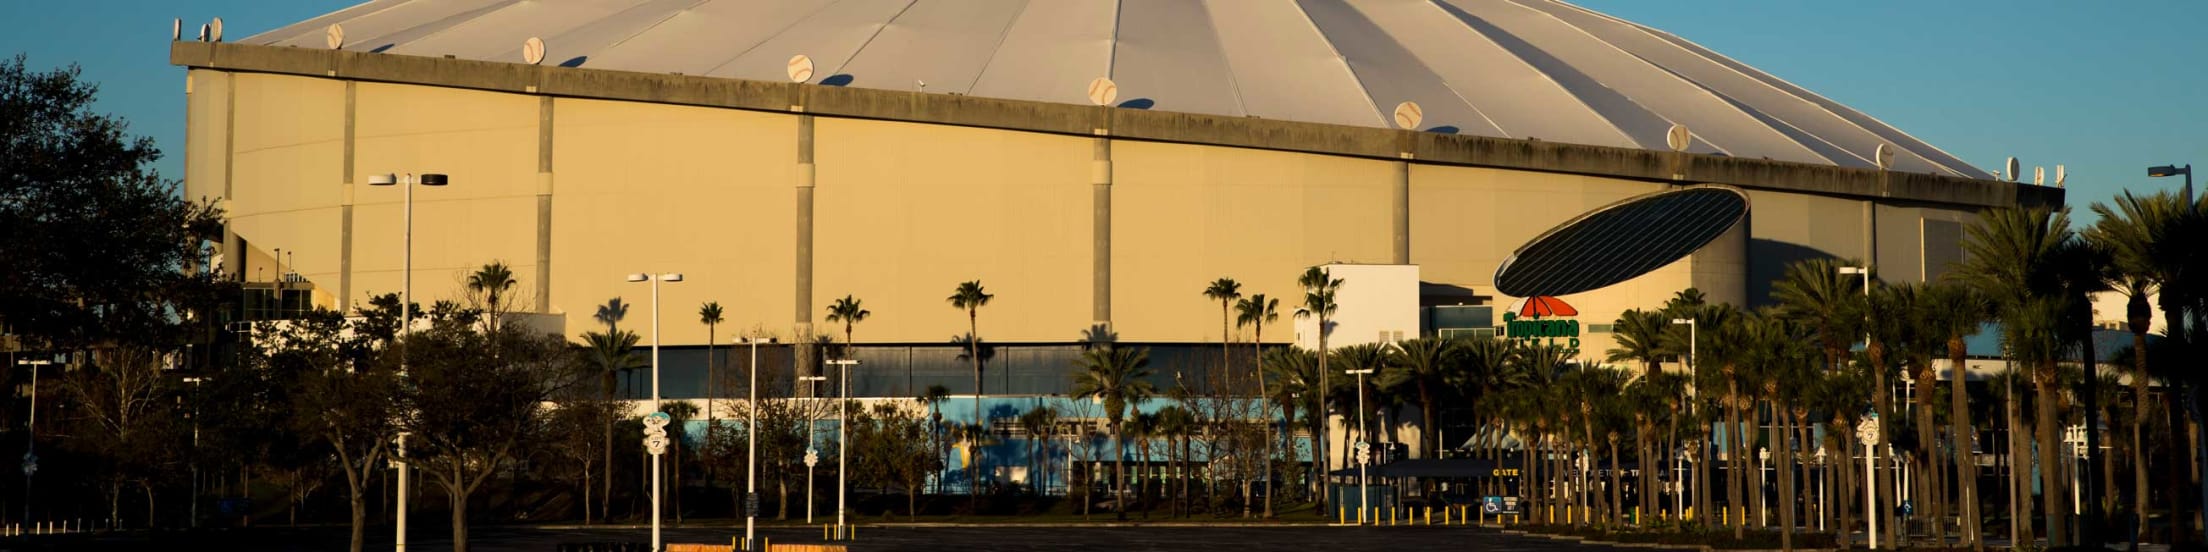 How readers across Tampa Bay would fill Tropicana Field - Axios Tampa Bay